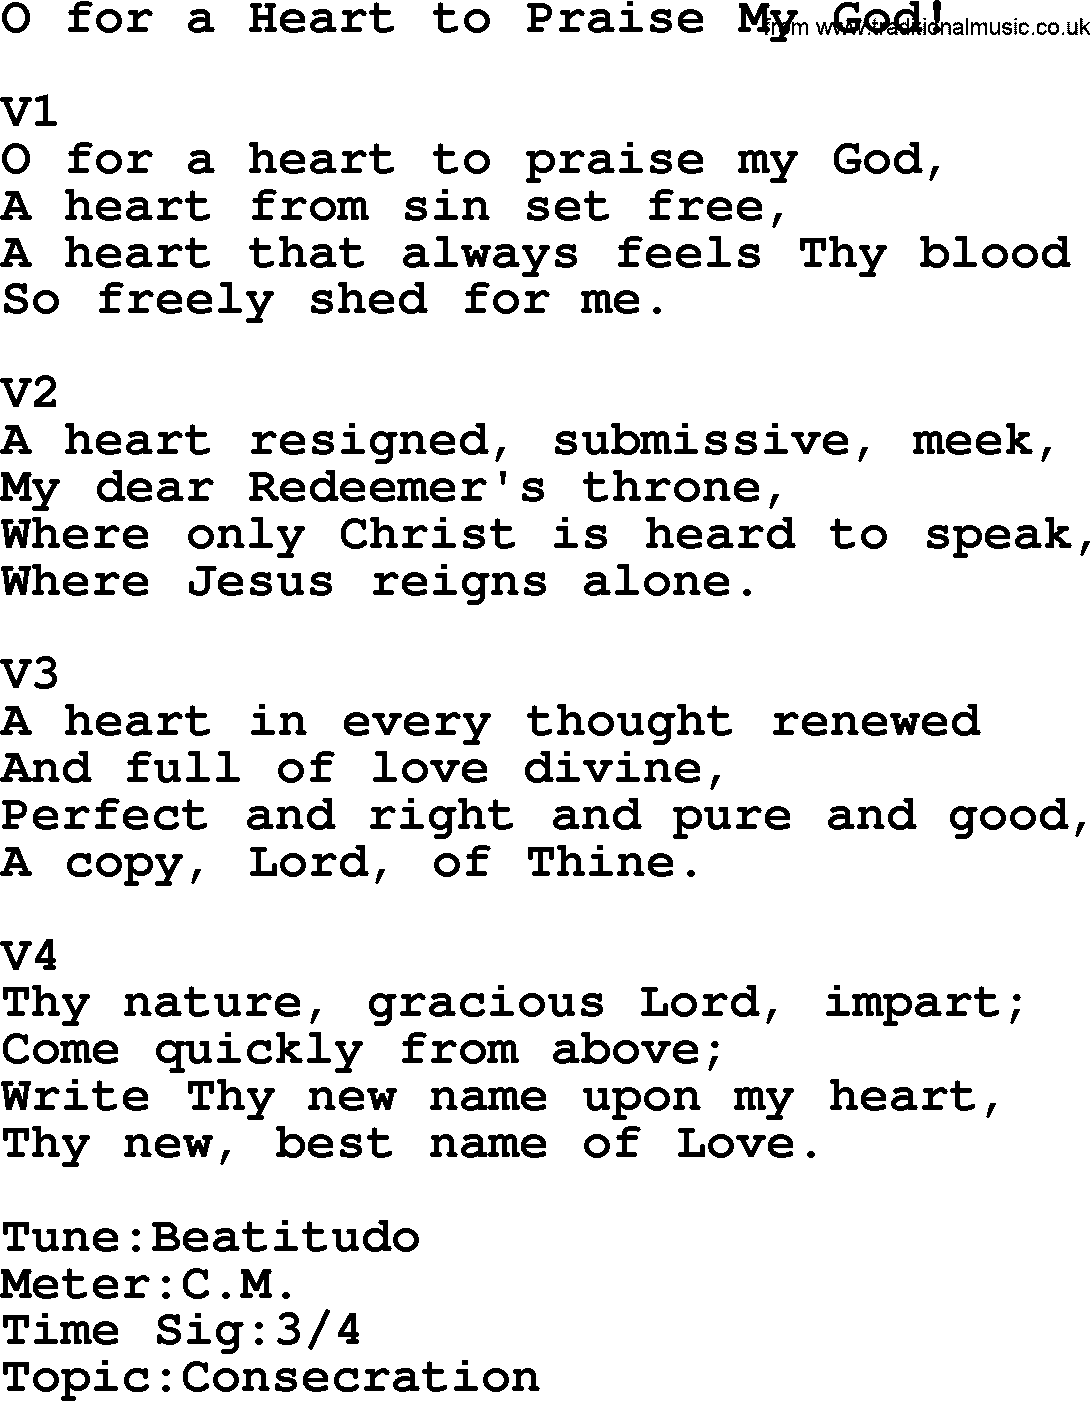 Adventist Hynms collection, Hymn: O For A Heart To Praise My God!, lyrics with PDF